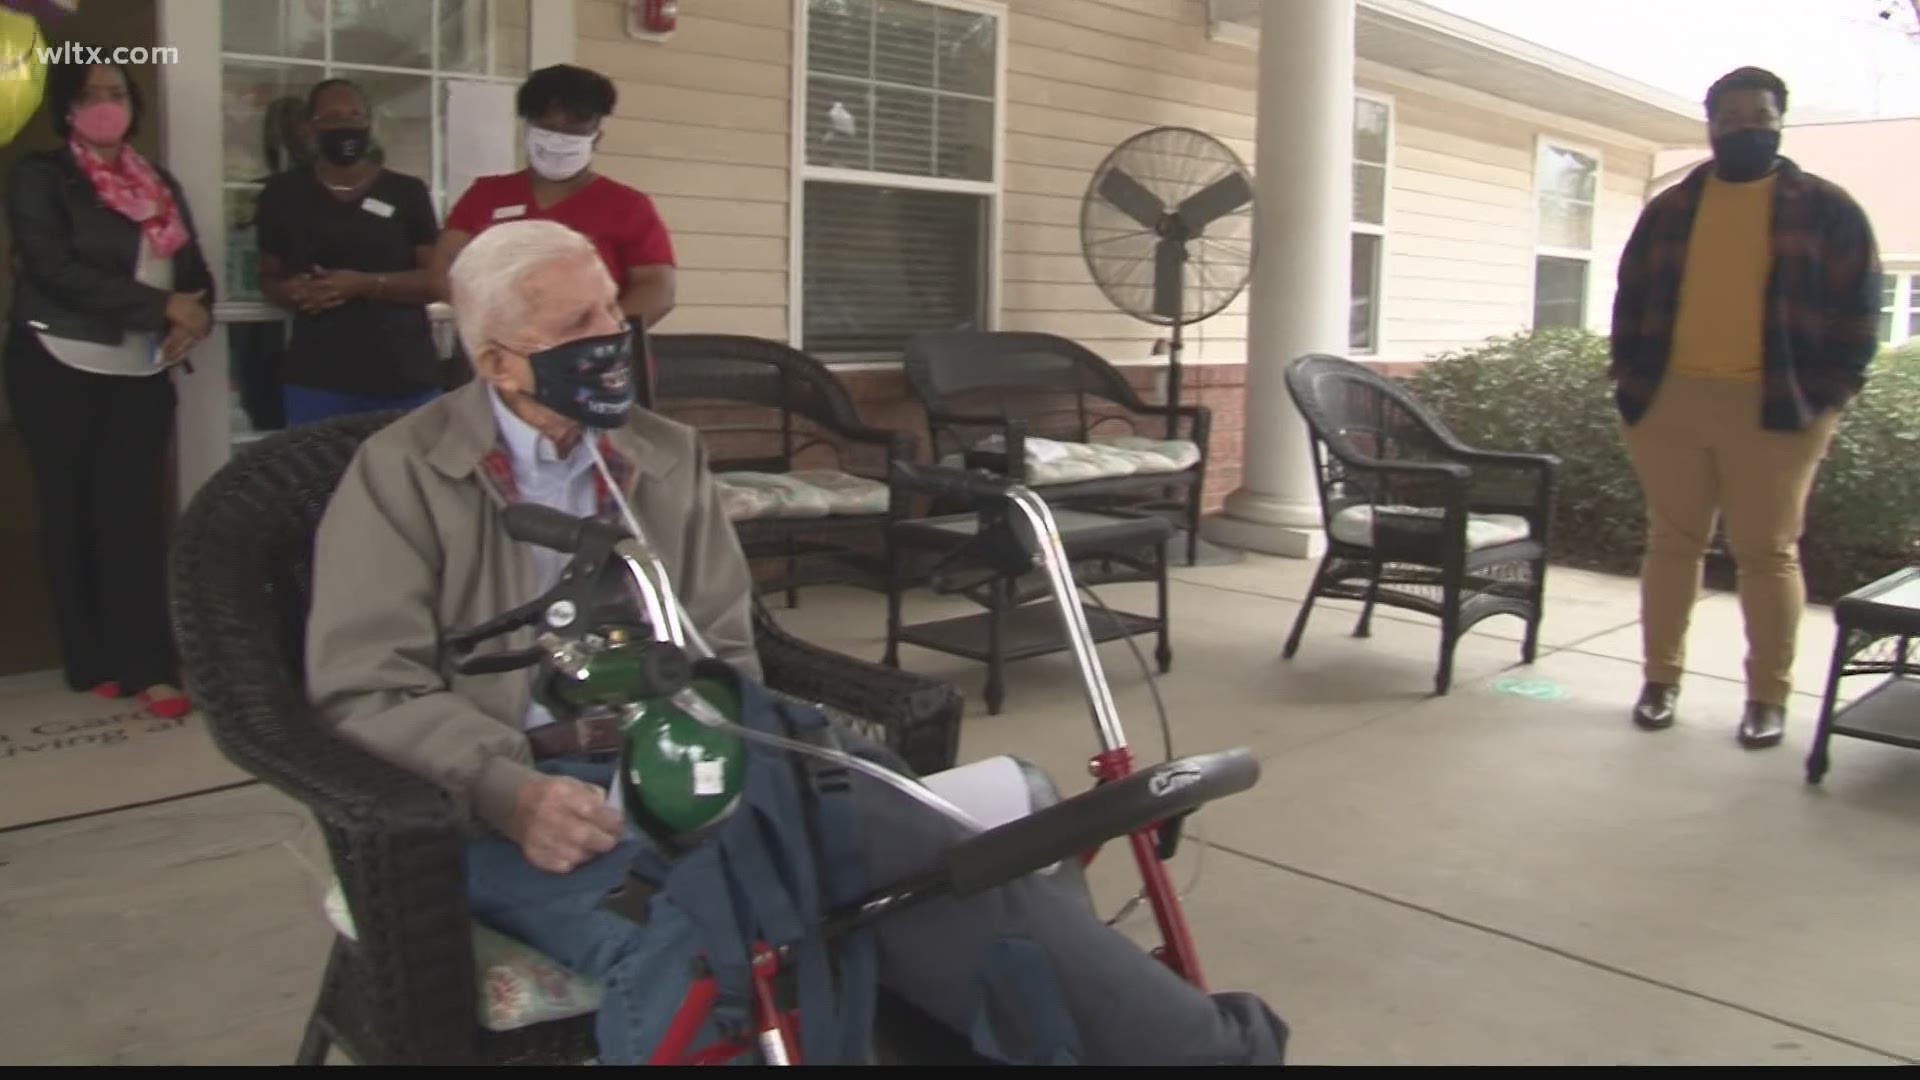 Charles Siniard celebrated his 100th birthday in Lexington, SC with a parade.